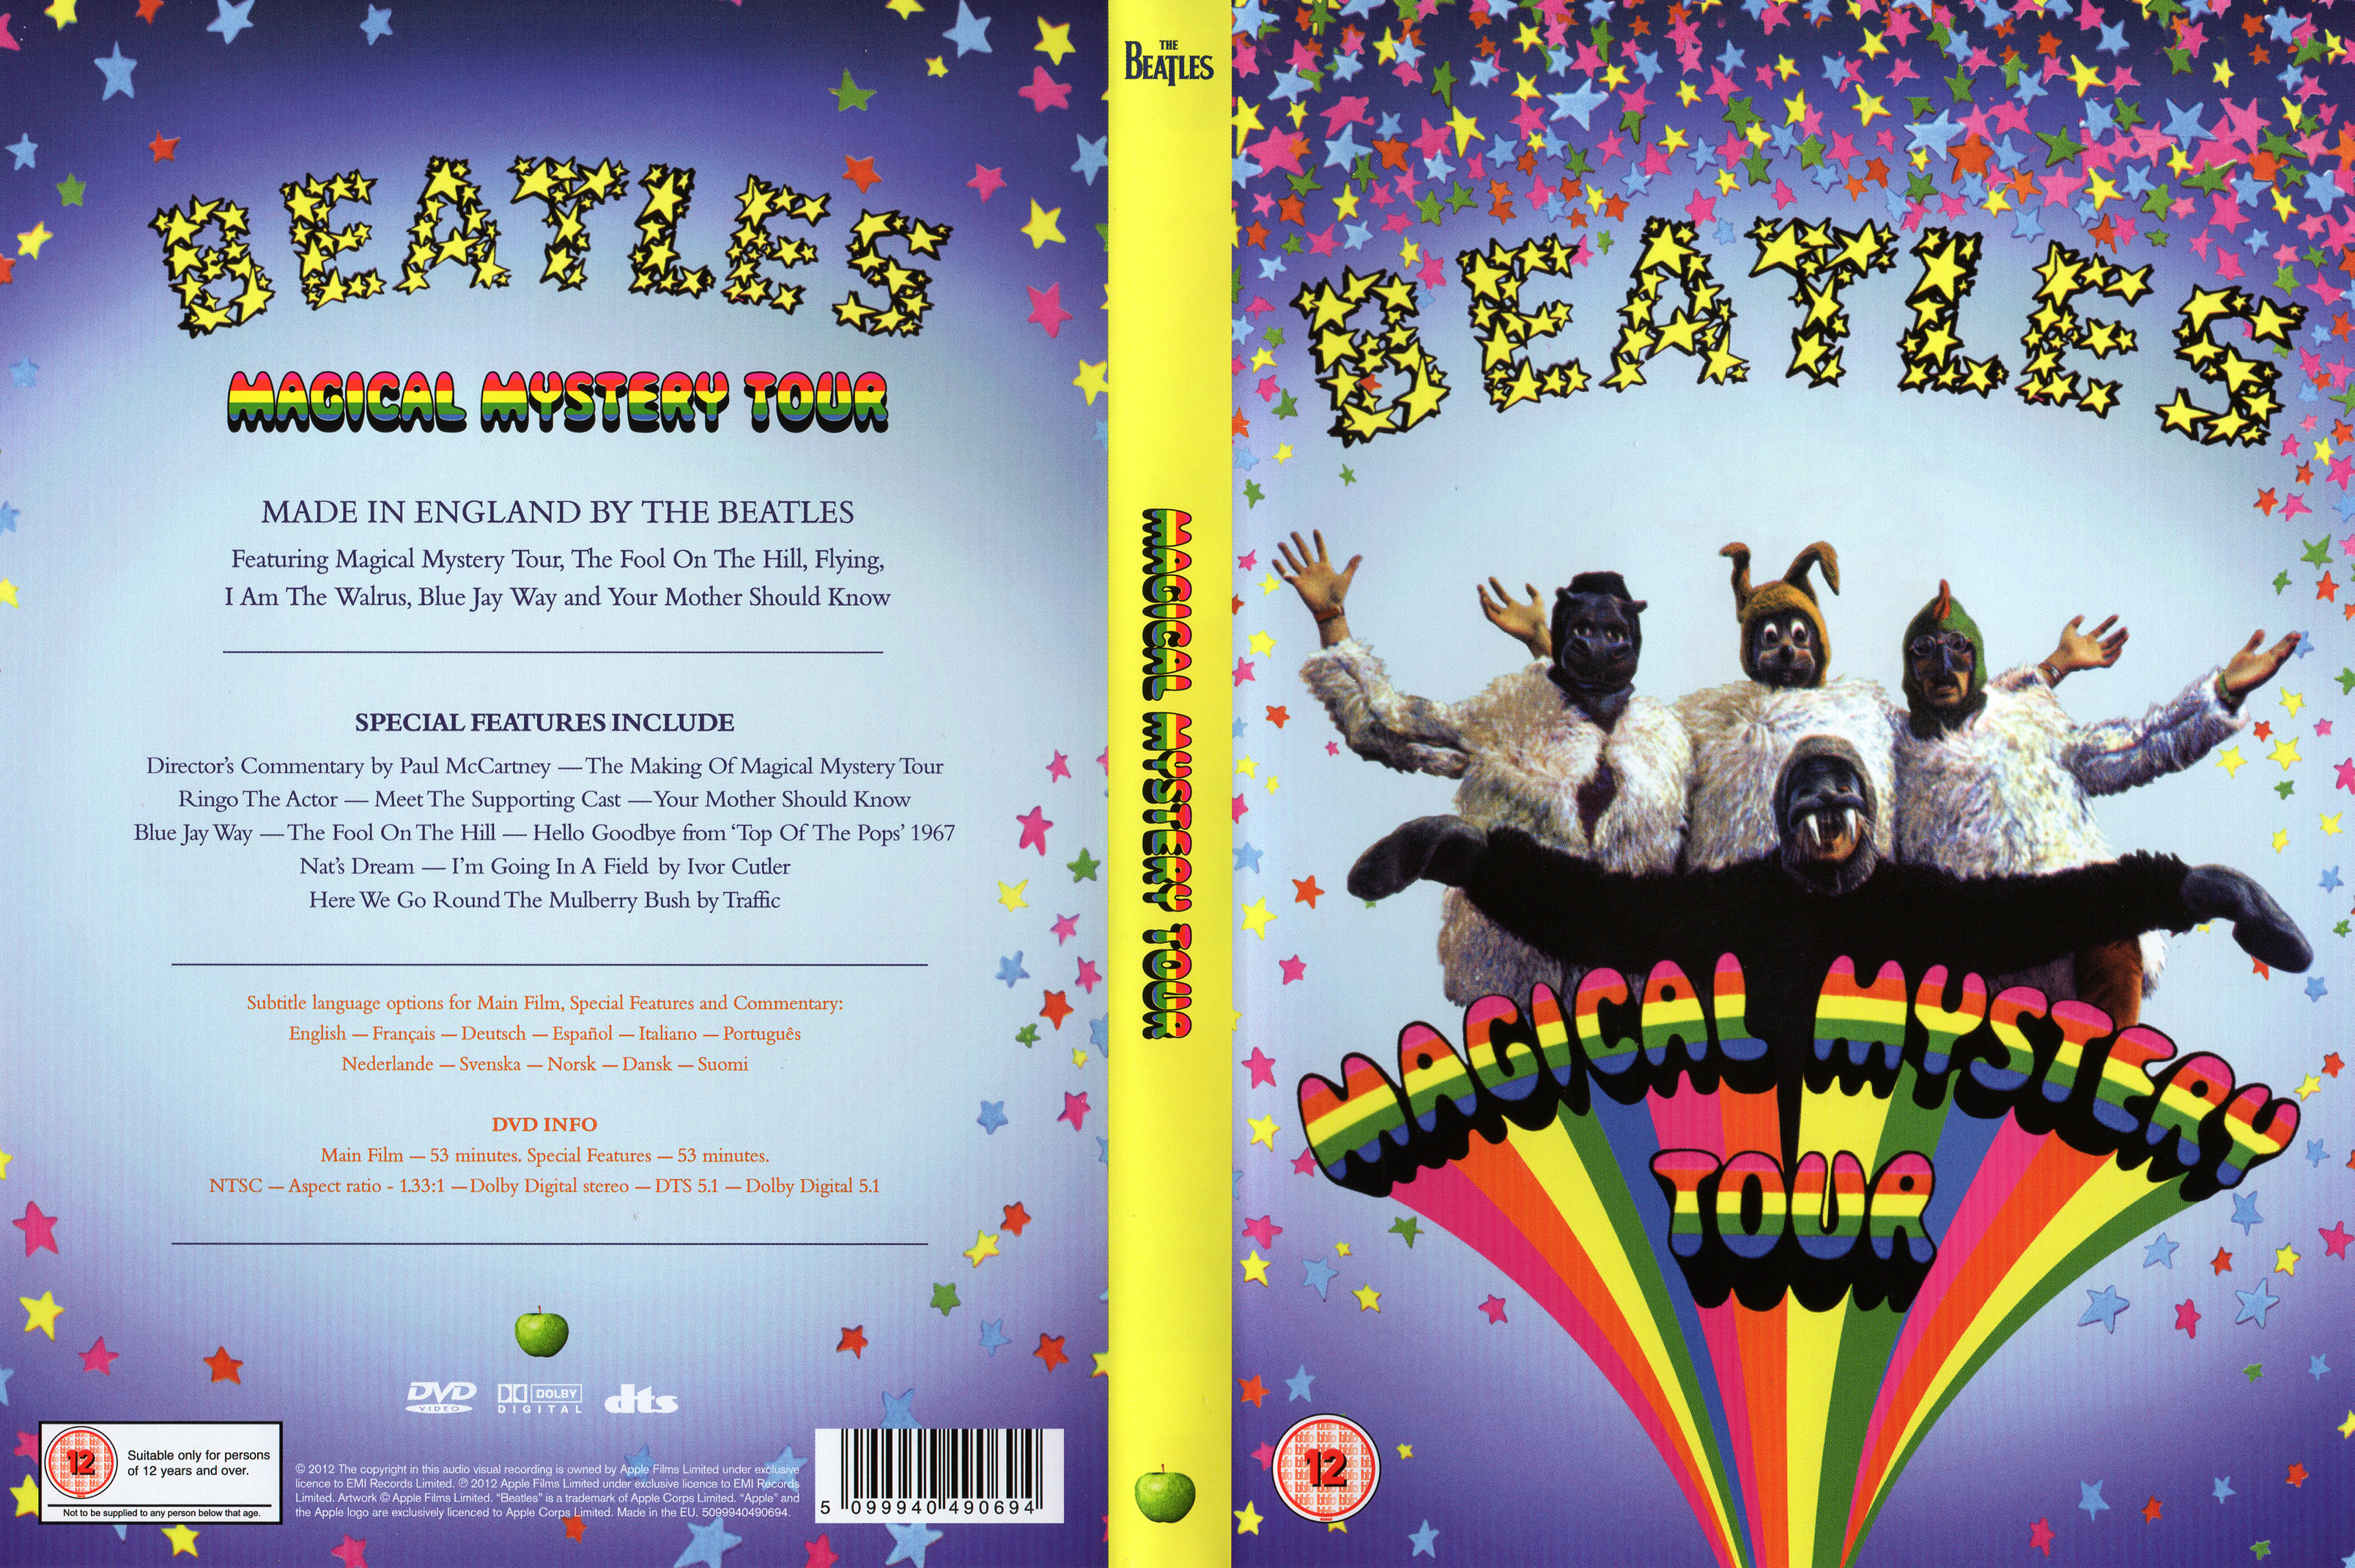 Jaquette DVD The Beatles Magical Mystery Tour